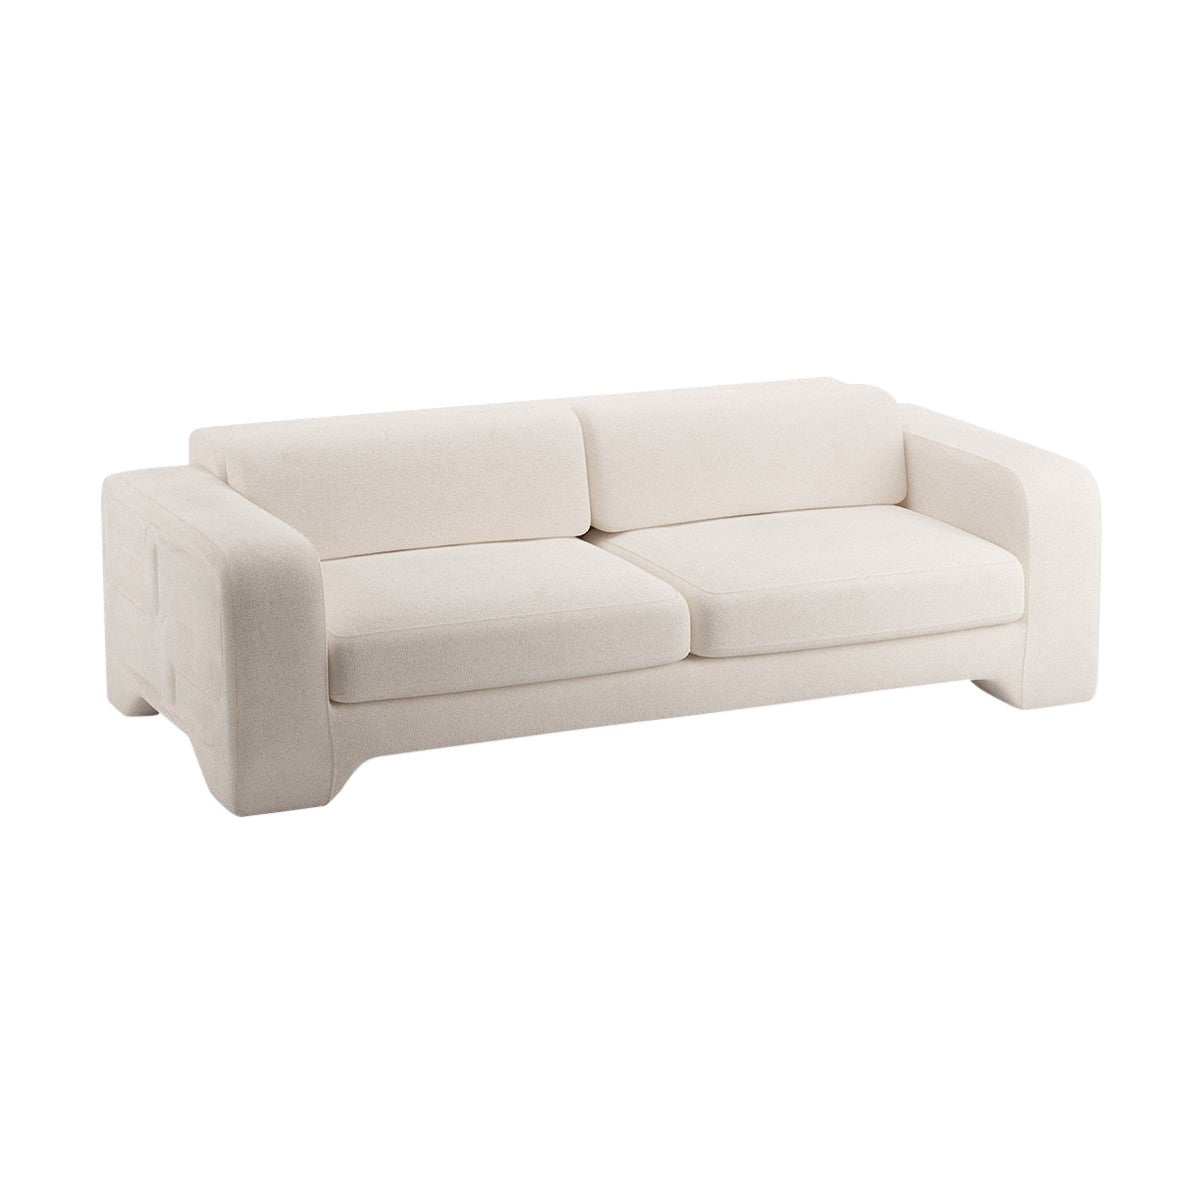 Popus Editions Giovanna 2.5 Seater Sofa in Macadamia London Linen Fabric For Sale